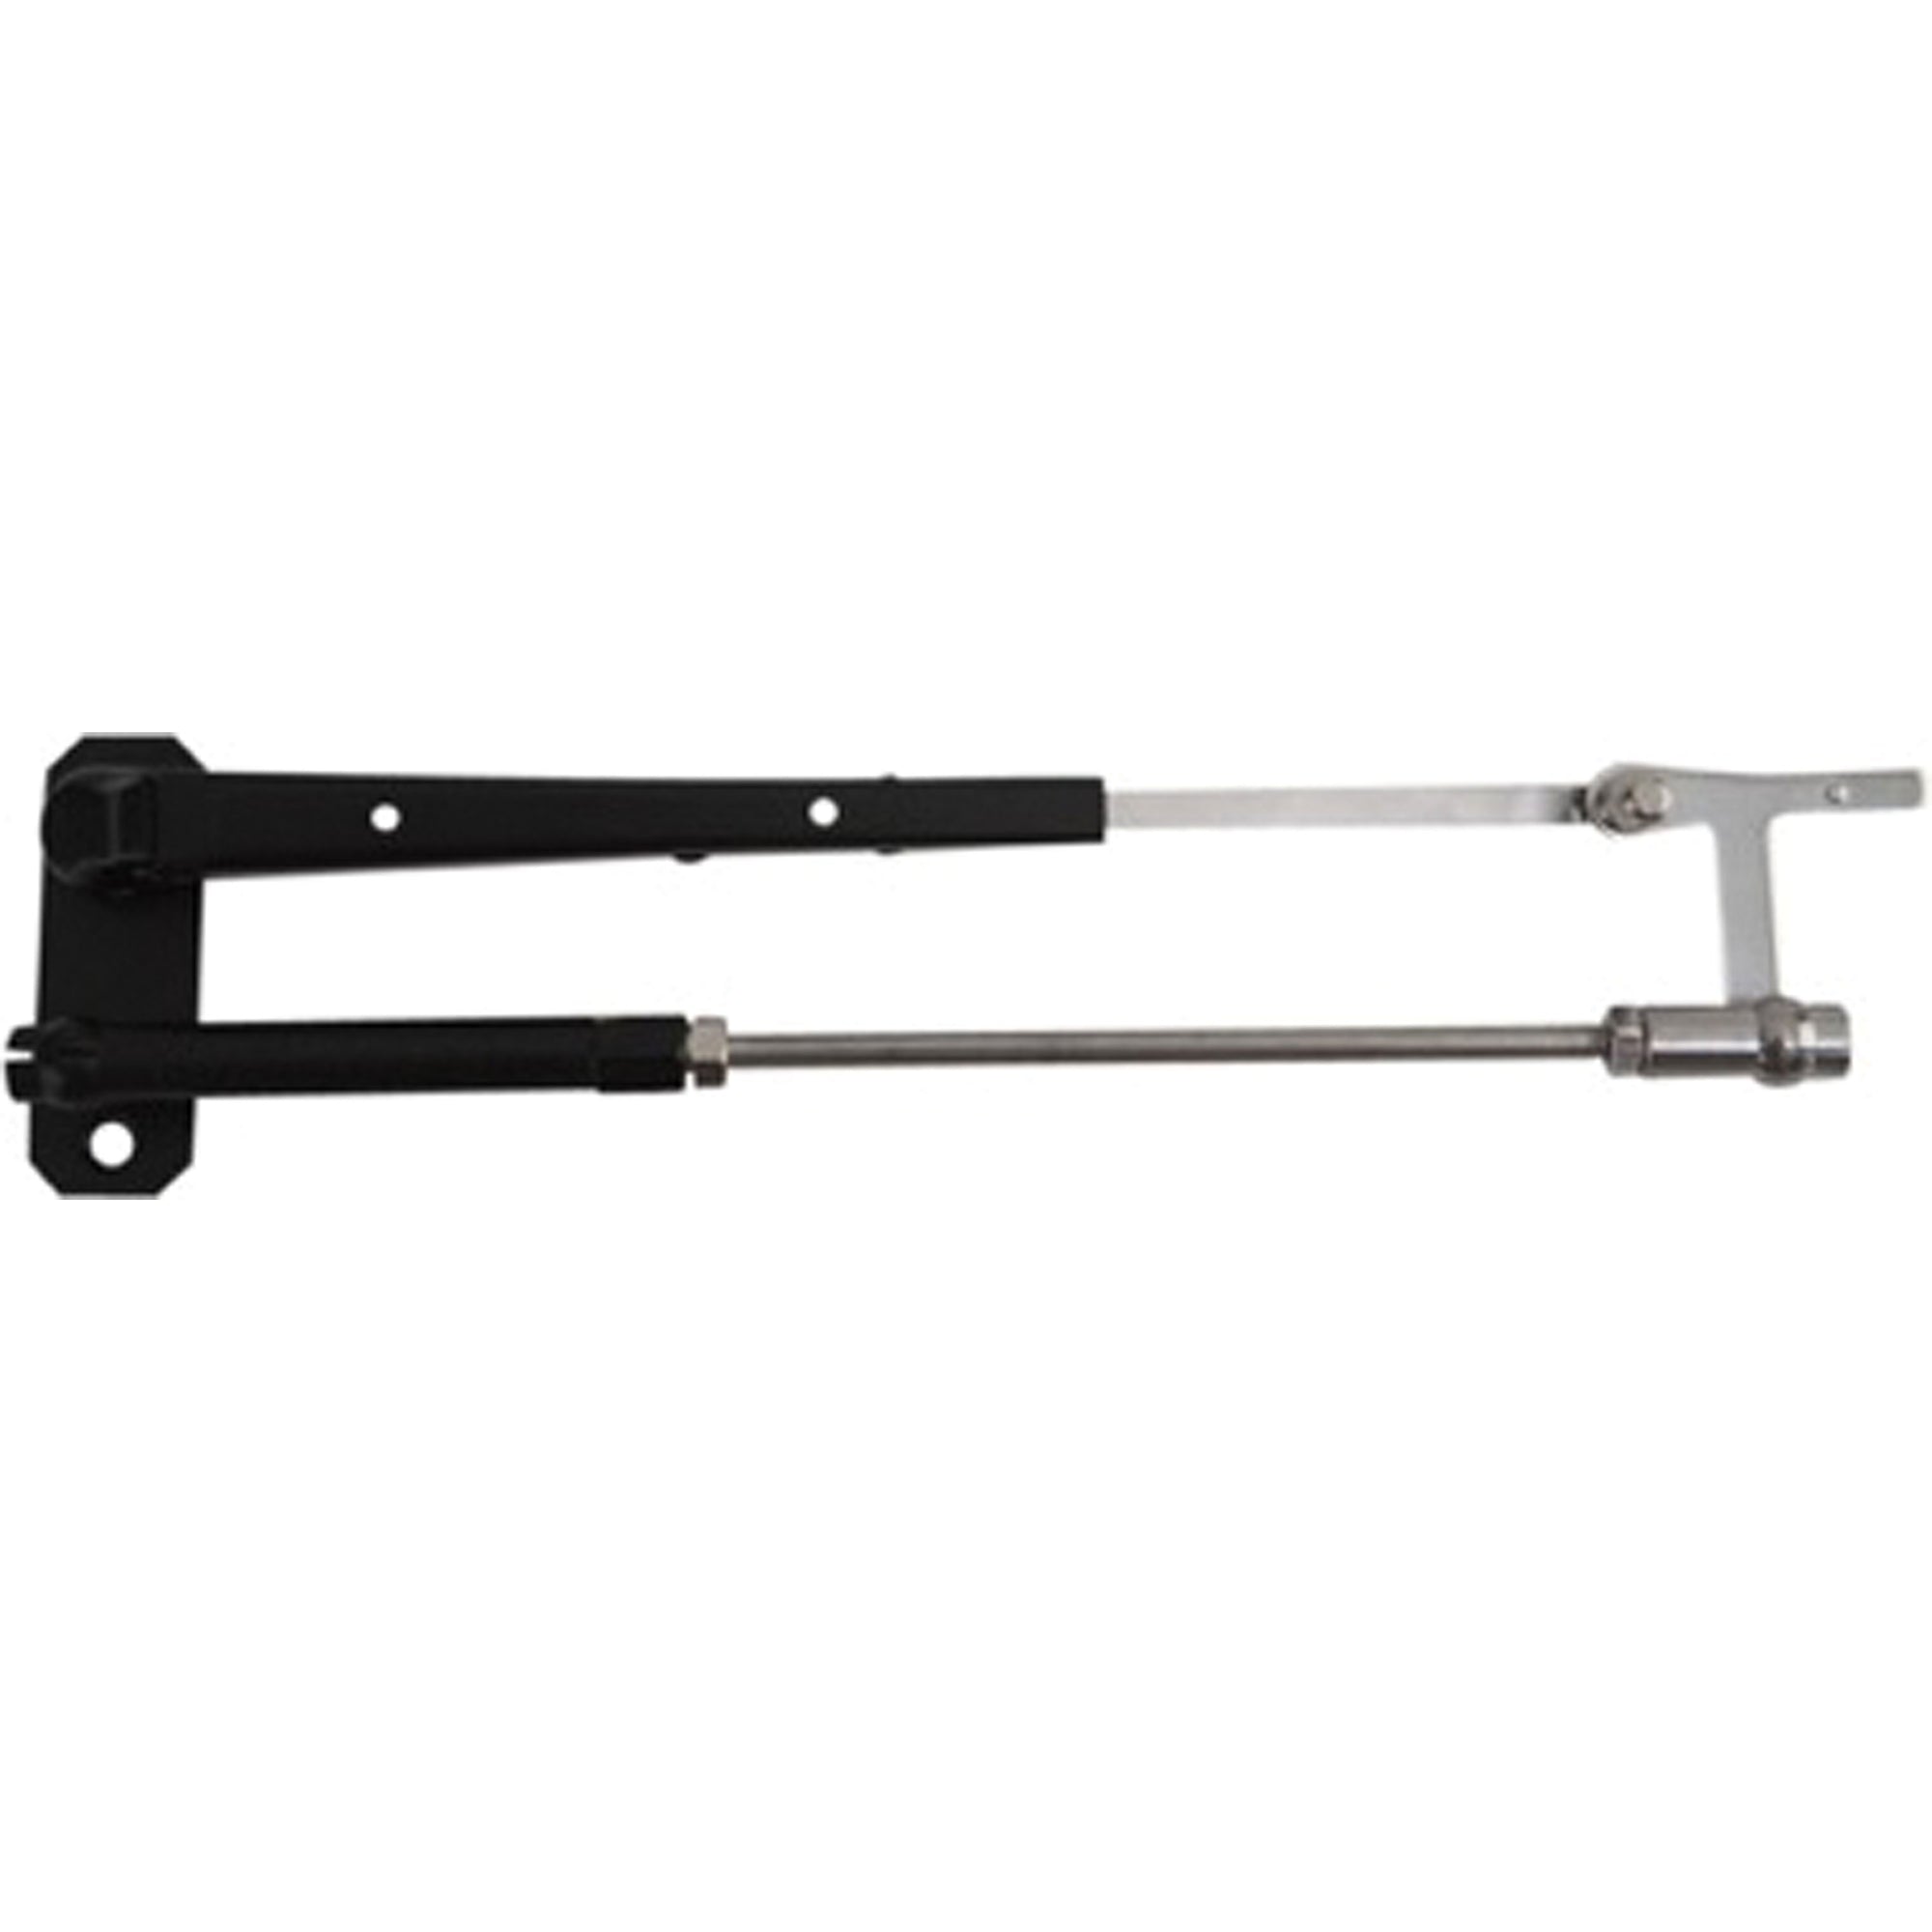 Sea-Dog 413319-1 Adjustable Stainless Steel Pantographic Wiper Arm - 15" to 19"